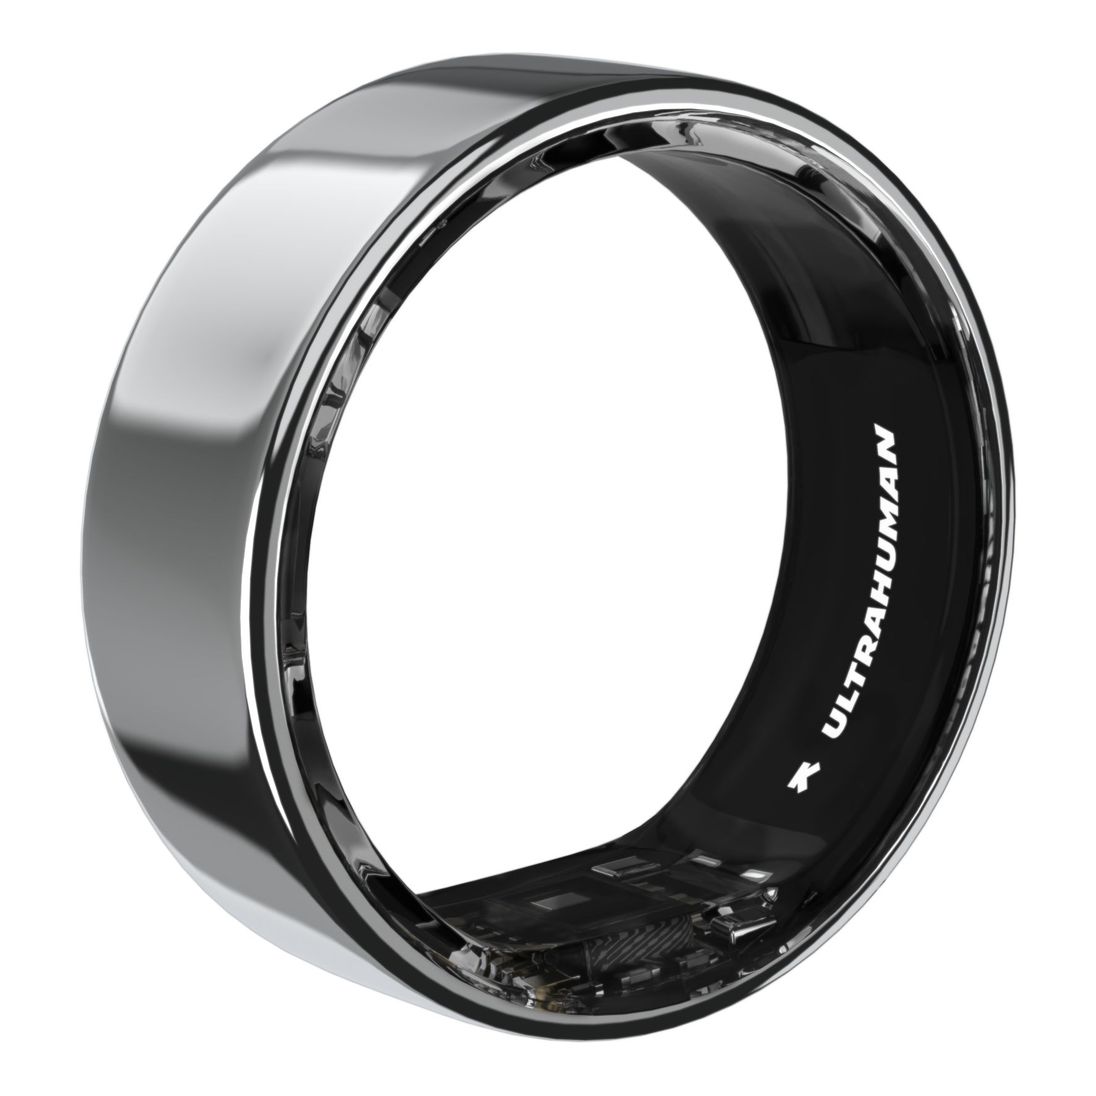 Ultrahuman Ring AIR Smart Ring - Size 11 - Space Silver